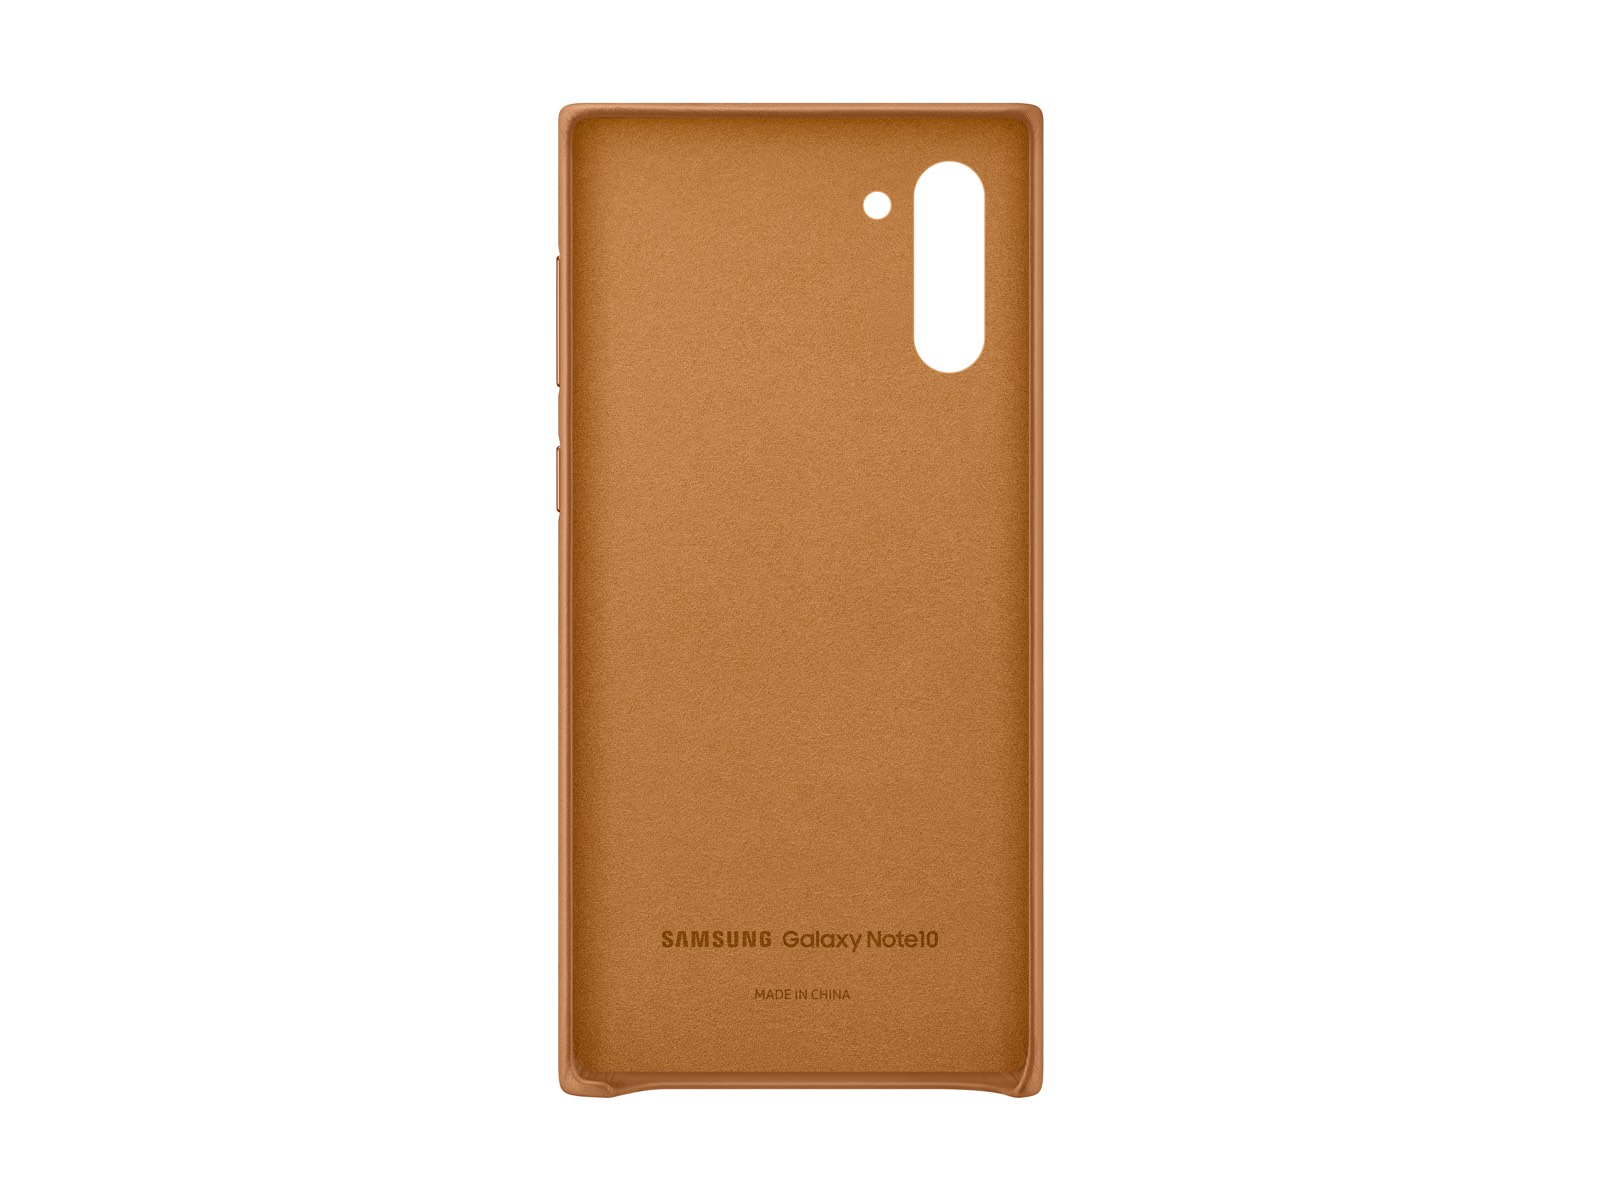 Thumbnail image of Galaxy Note10 Leather Back Cover, Tan